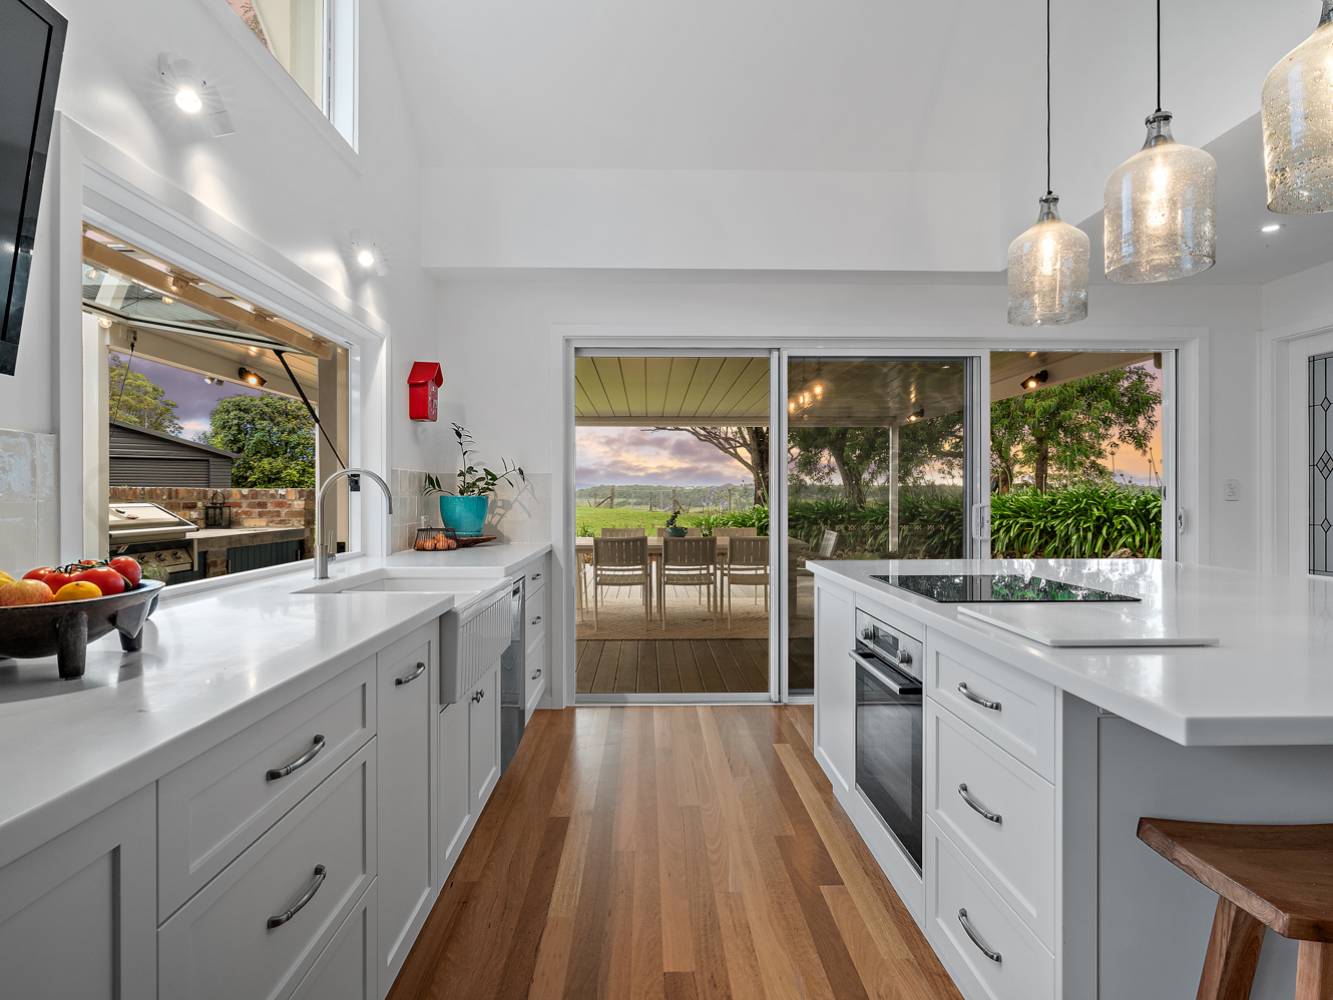 Beautiful new kitchen, with enormous island, conduction stove-top, corian benches, double farmhouse sink, gas-lift window on the left to the side deck, glass sliding doors to the back deck